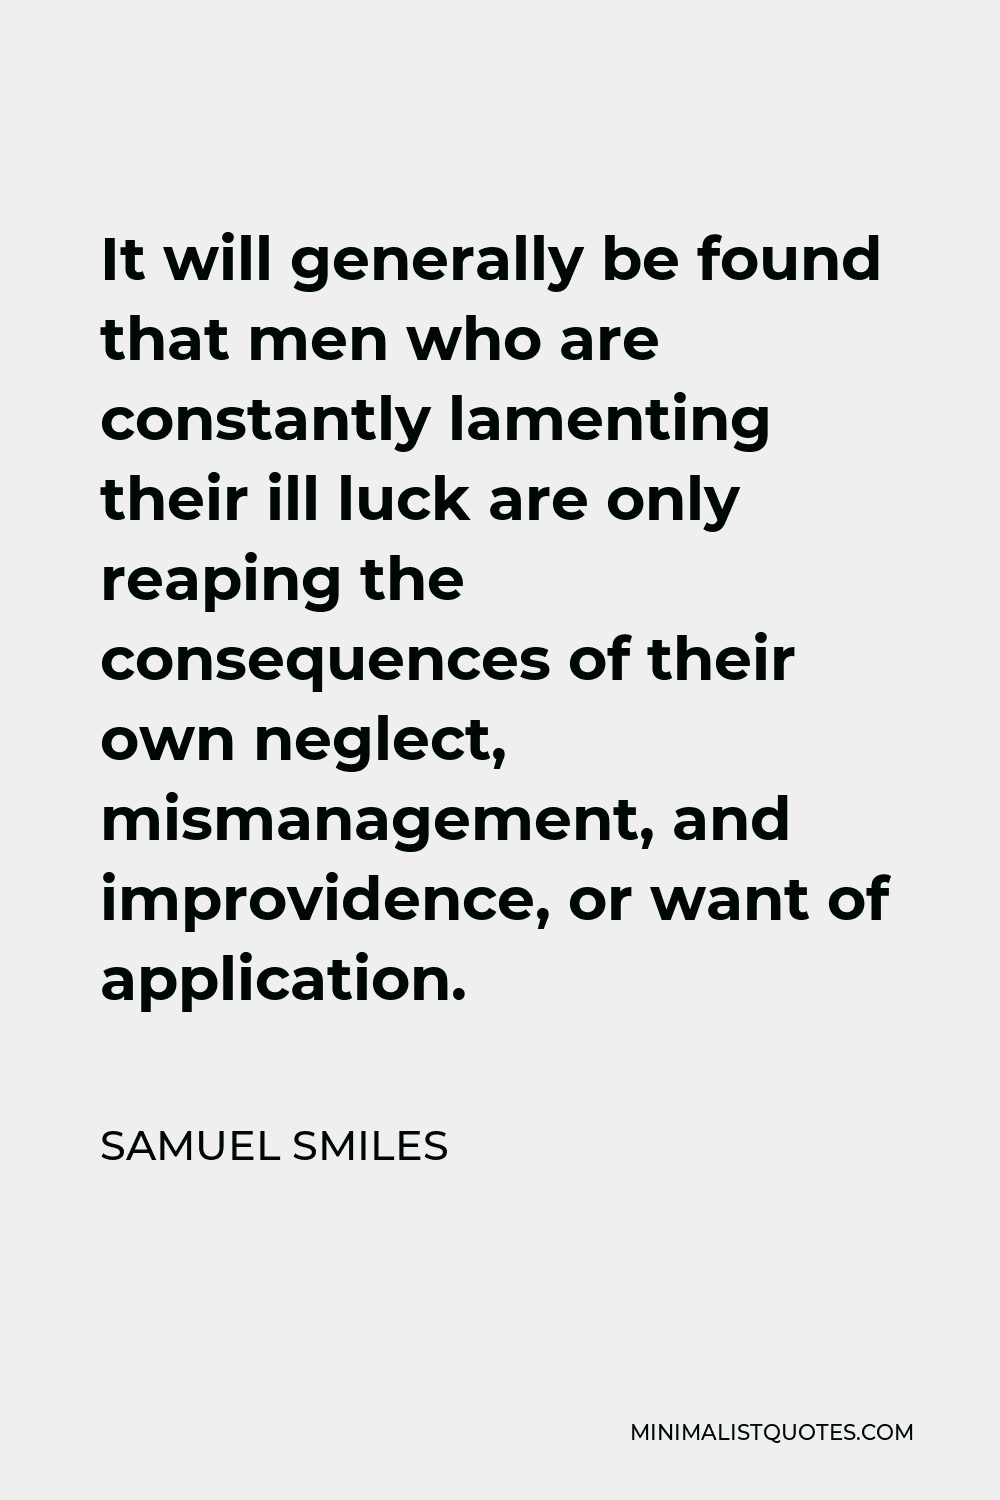 Samuel Smiles Quote - It will generally be found that men who are constantly lamenting their ill luck are only reaping the consequences of their own neglect, mismanagement, and improvidence, or want of application.